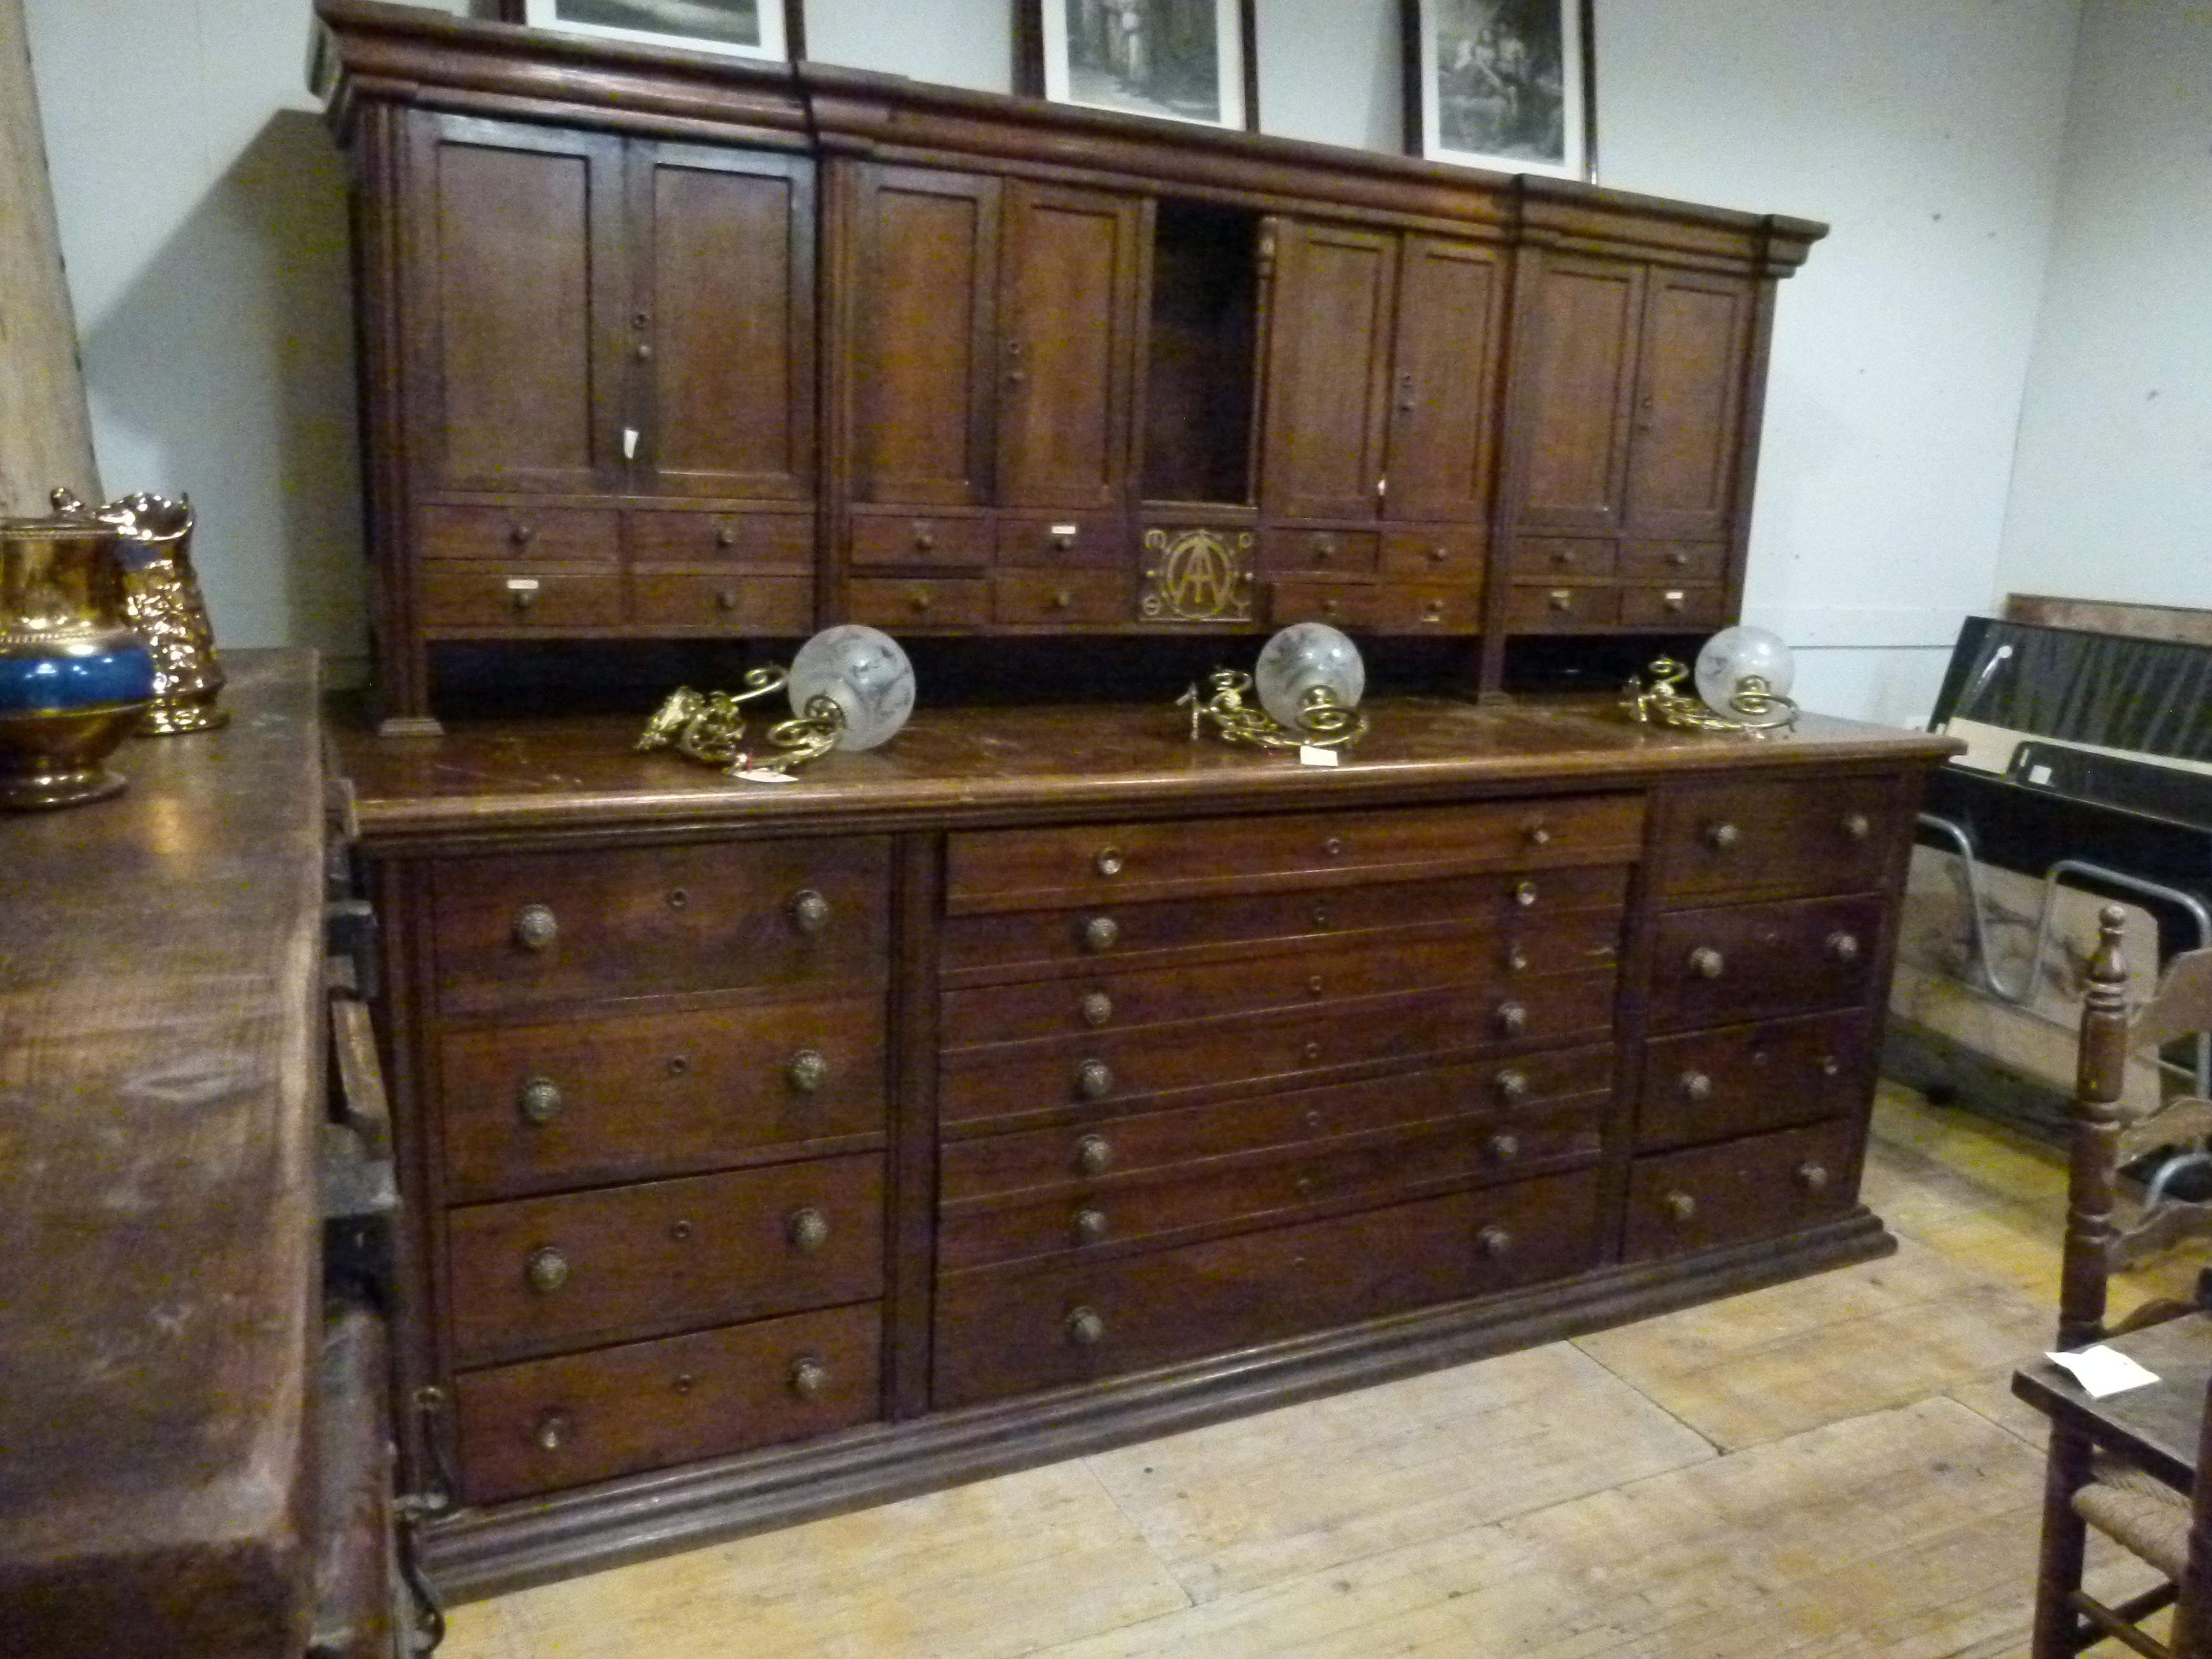 19th Century Large Sacristy Cabinet  meant to store the chasubles. Ideal for big spaces where it could used as  a housekeepers cupboard. 
The upper part can be disassembled from  the lower part  for shipping.

